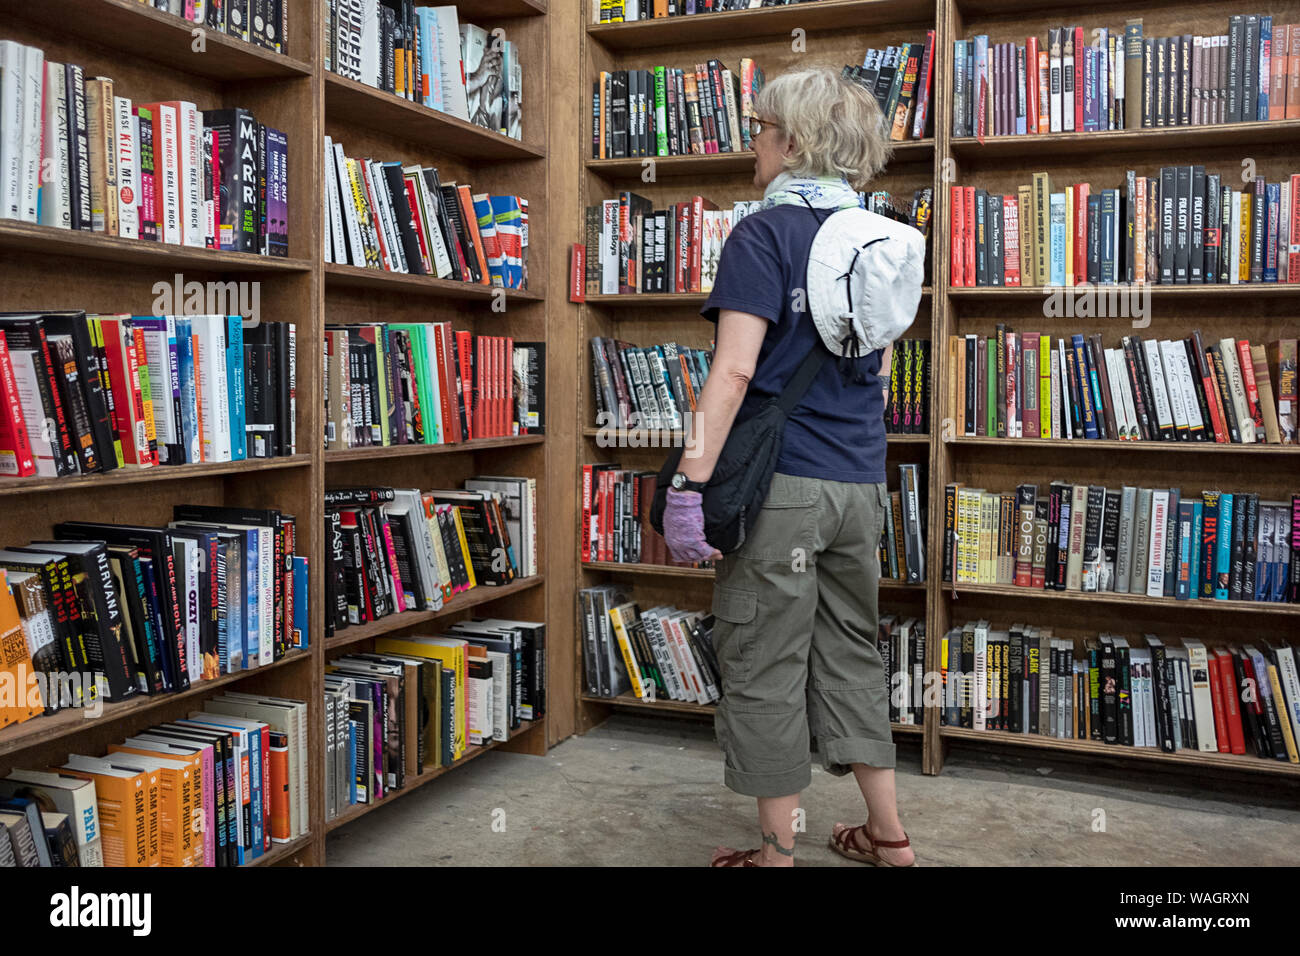 A woman shopping for music books at The Strand Book Store on Broadway in Greenwich Village, New York City. Stock Photo